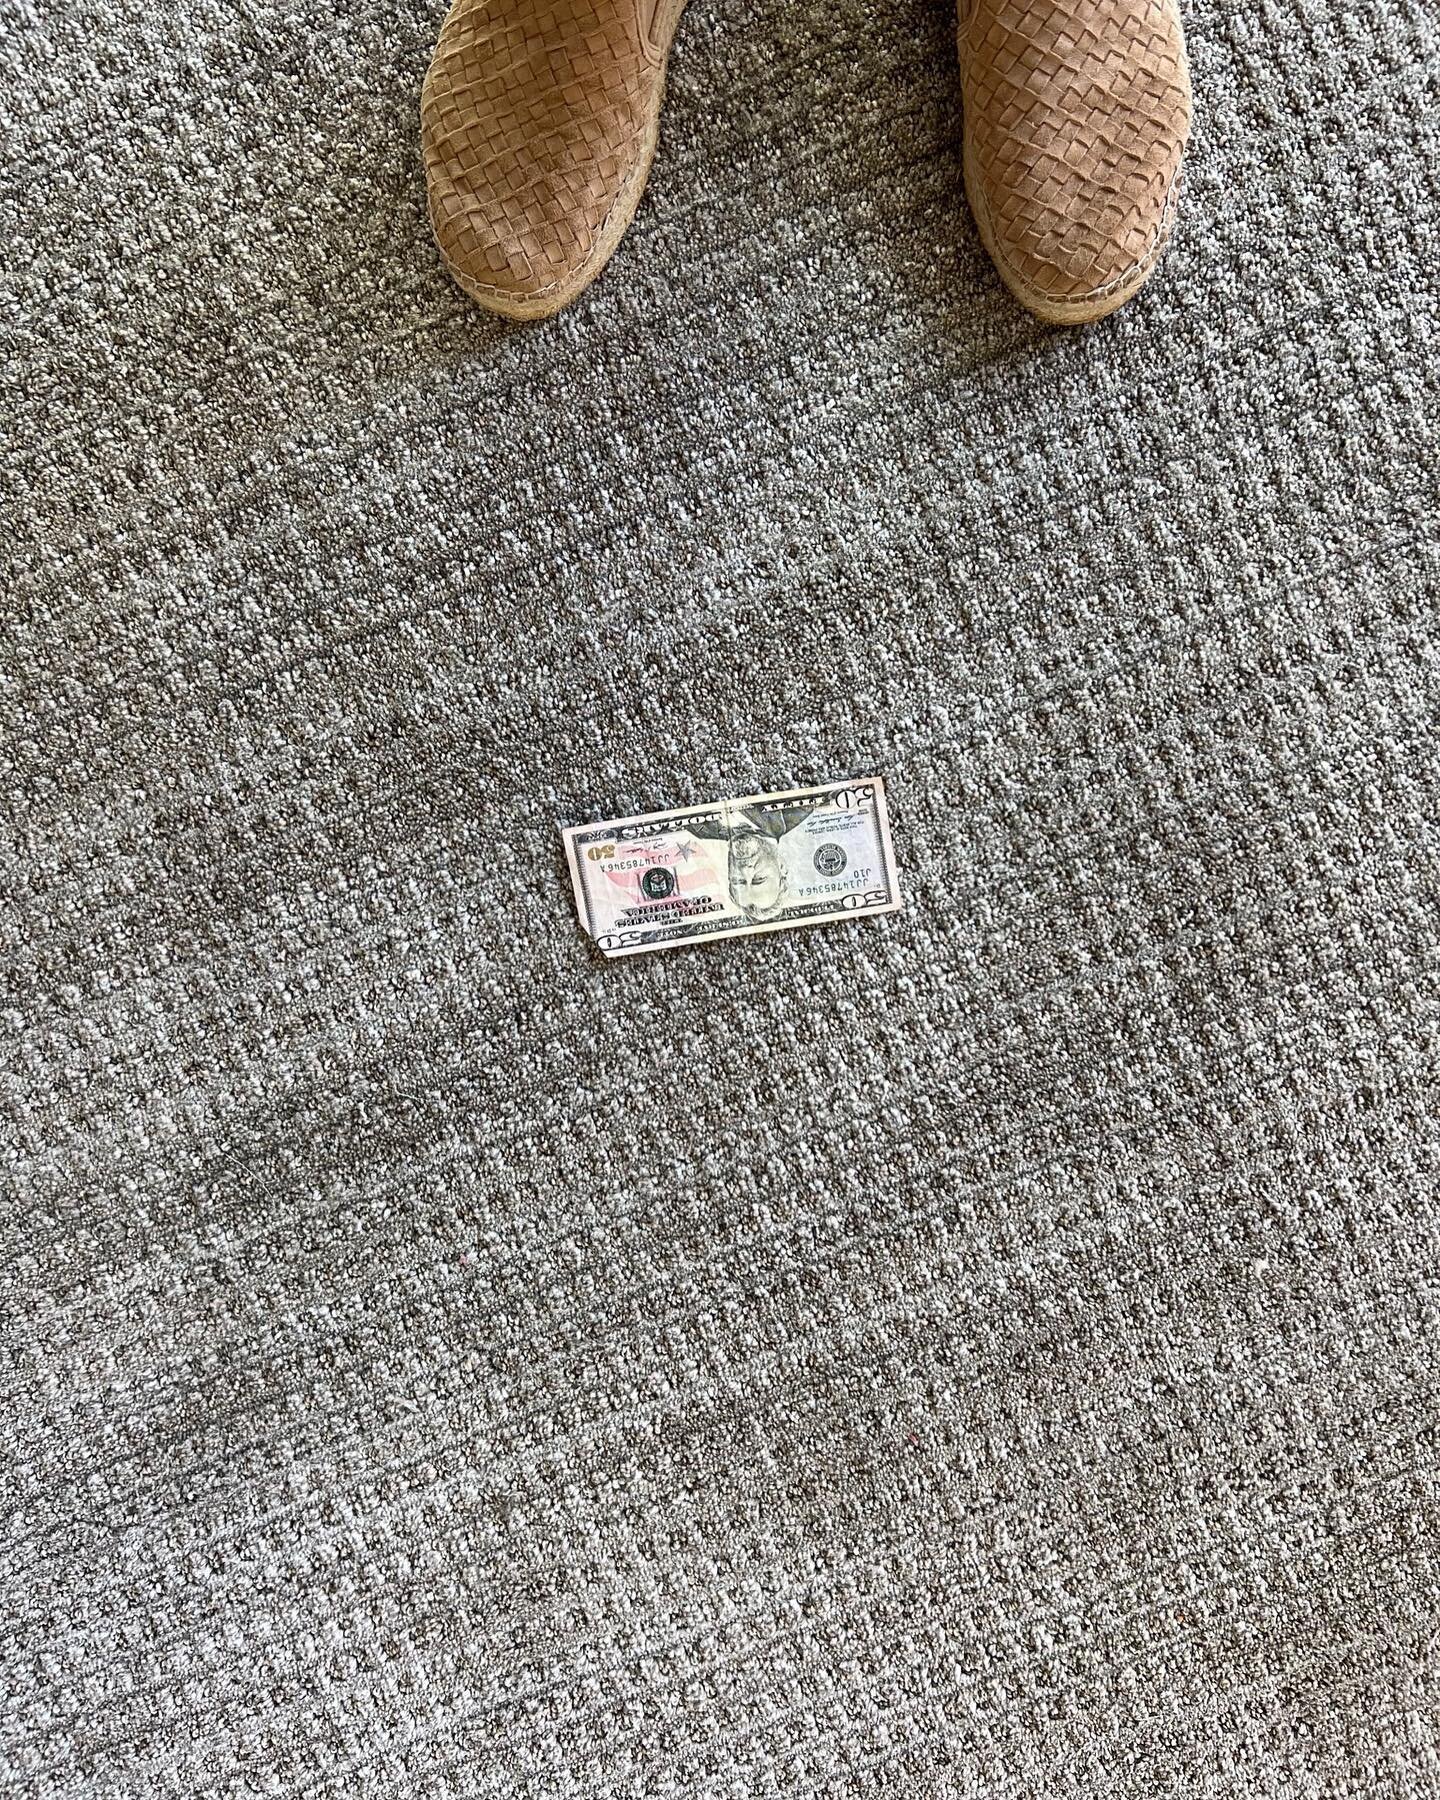 Customers frequently ask if it&rsquo;s ok to leave their house and/or do we trust our installers. Our answer is always 100% we trust them. Case in point &Aacute;ngel, our carpet installer, called to let us know he found this $50 bill under the carpet